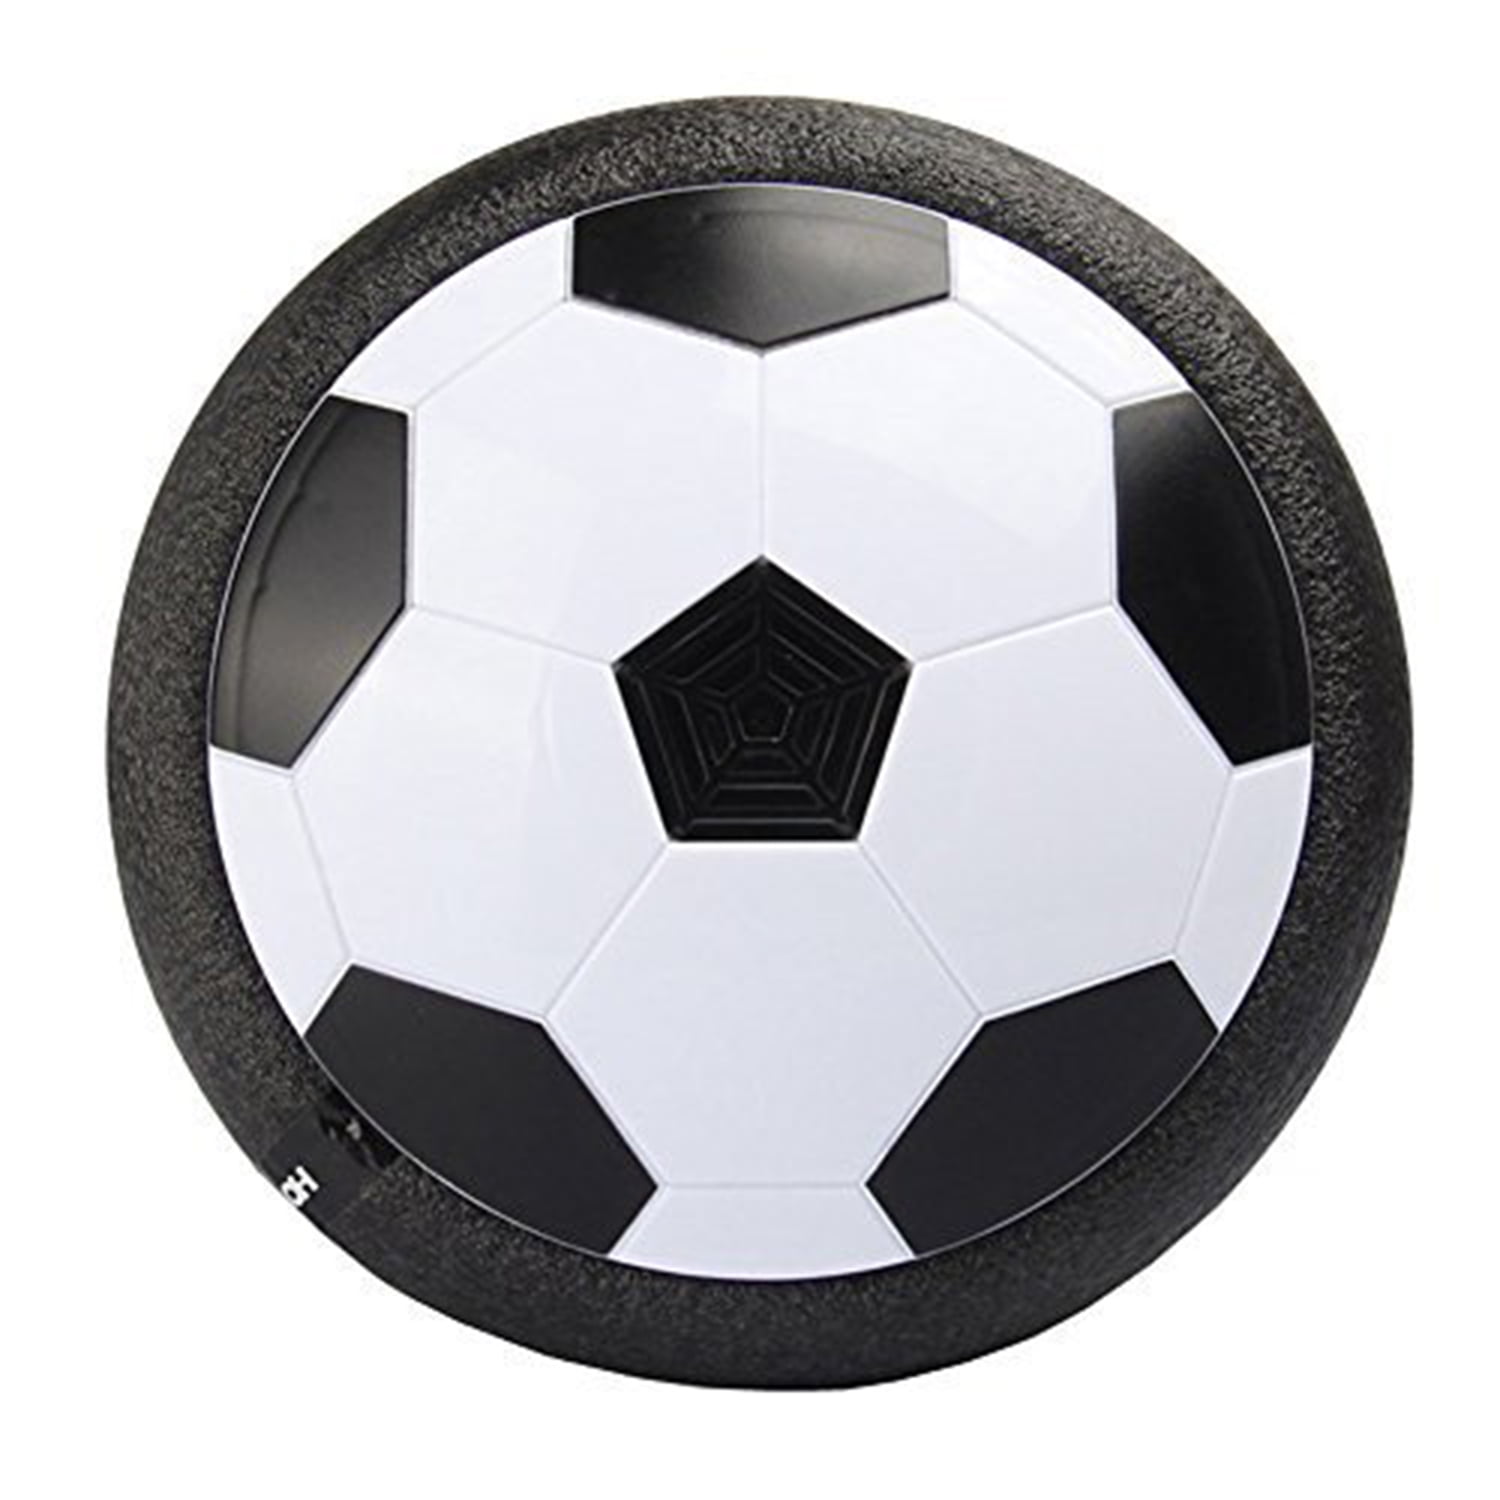 Alomejor Kids Toys Hover Ball Soccer Ball Toy Set 2-in-1 Soccer Goal Net with 2 Goals an Inflatable Ball Ice Hockey Puck Set Indoor Outdoor Sports Ball Game for Children 